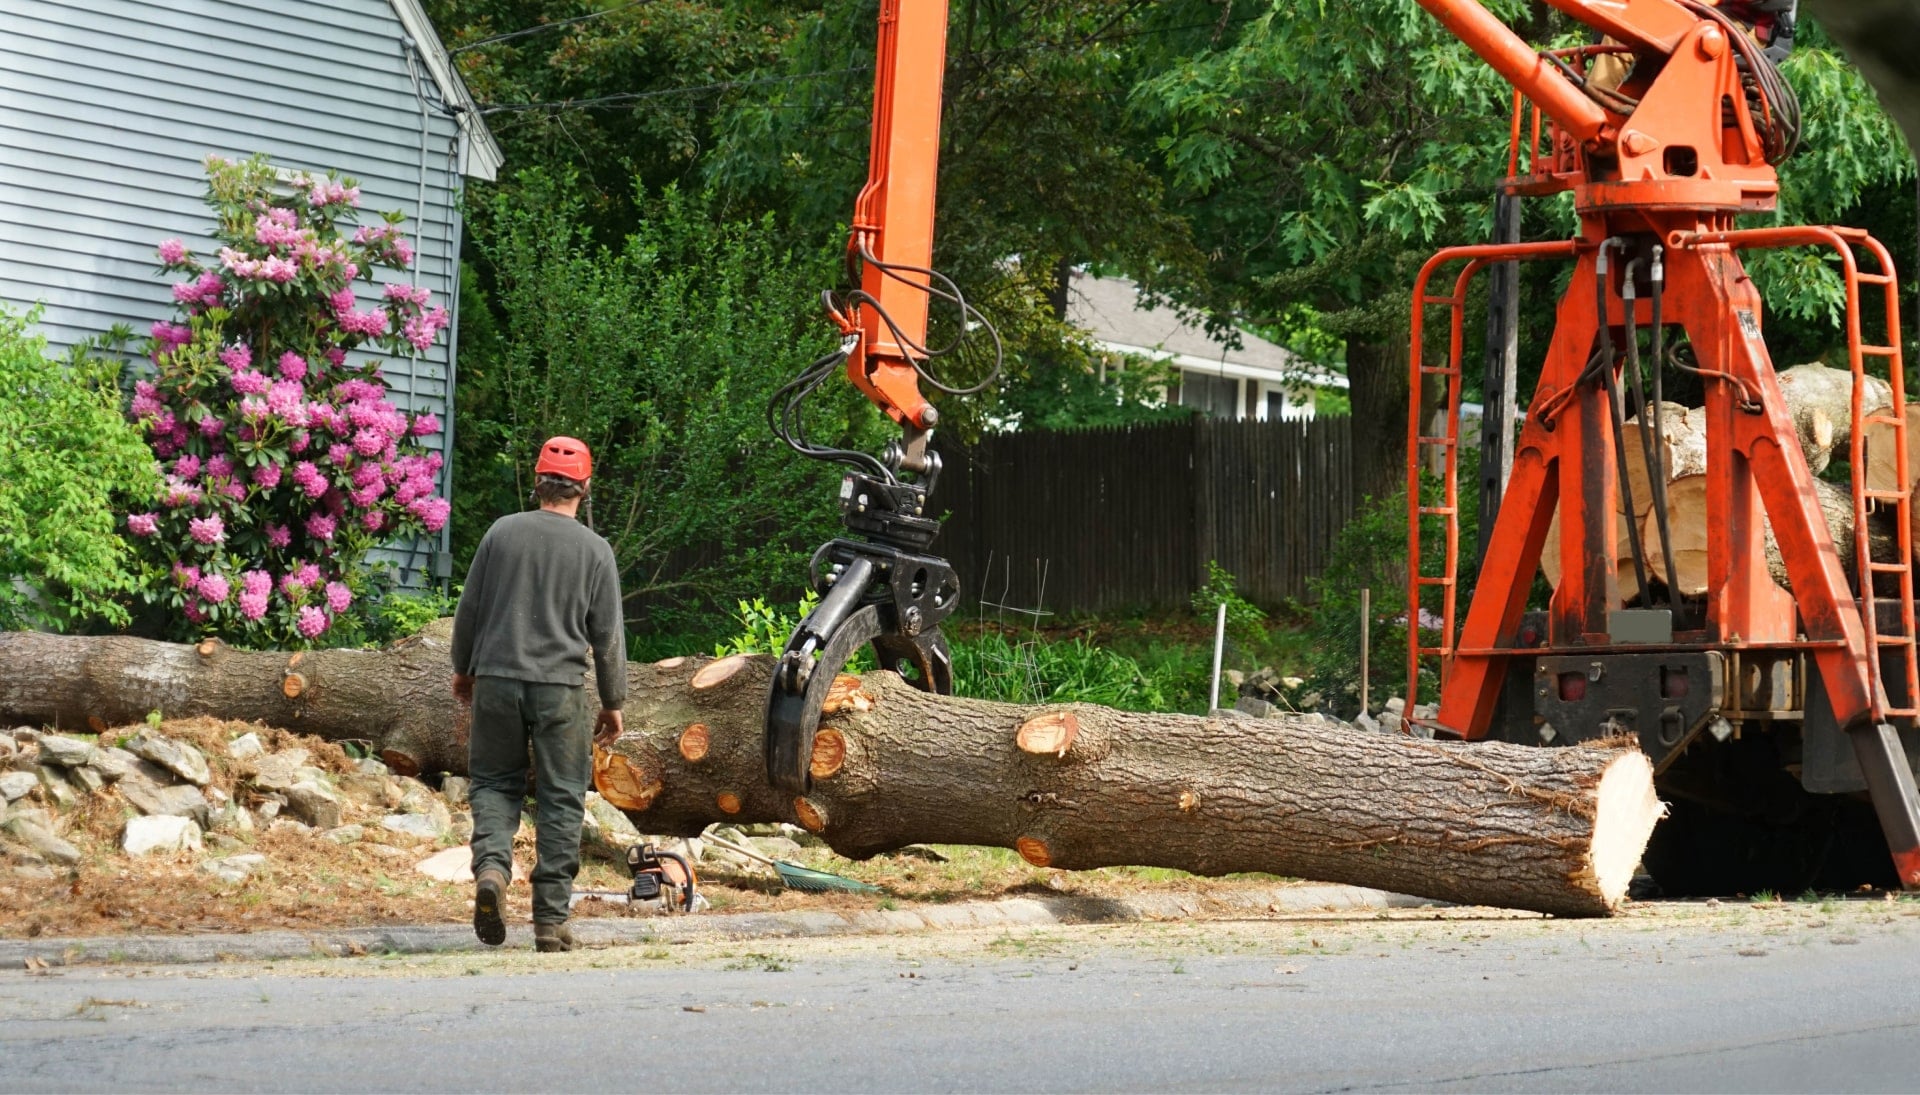 Local partner for Tree removal services in Medford